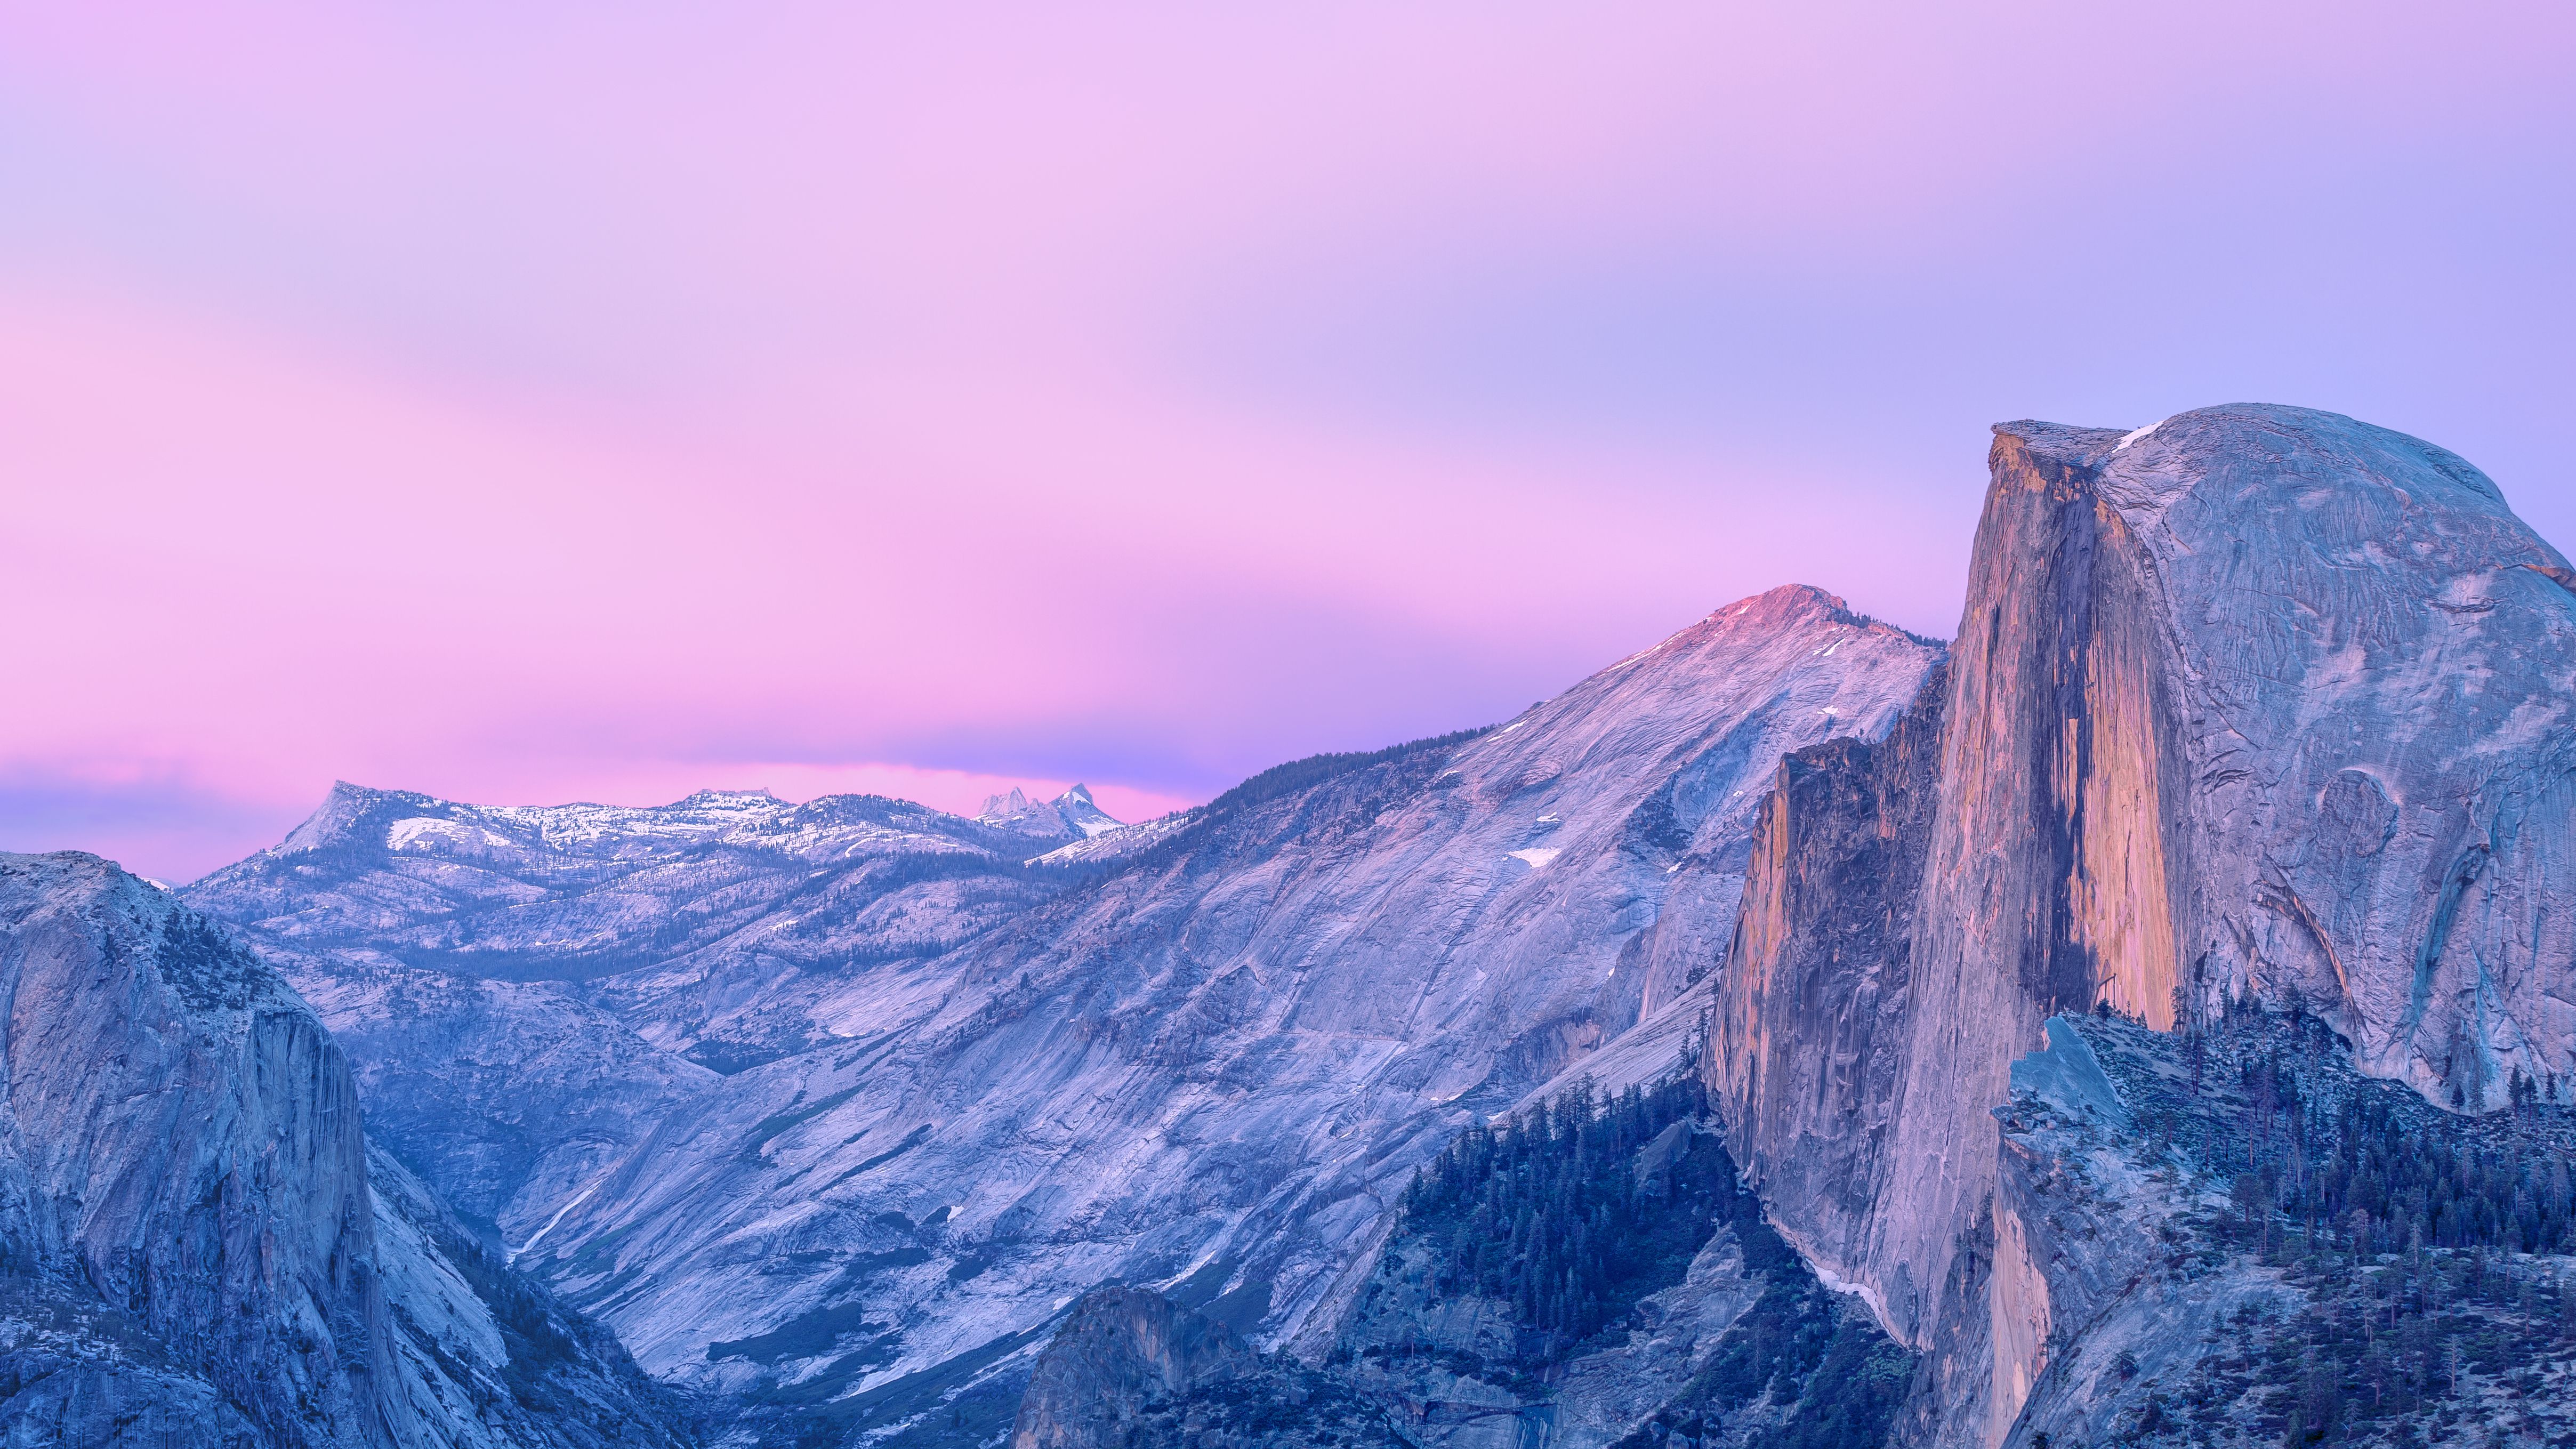 OS X Yosemite wallpaper are here, and they're beautiful